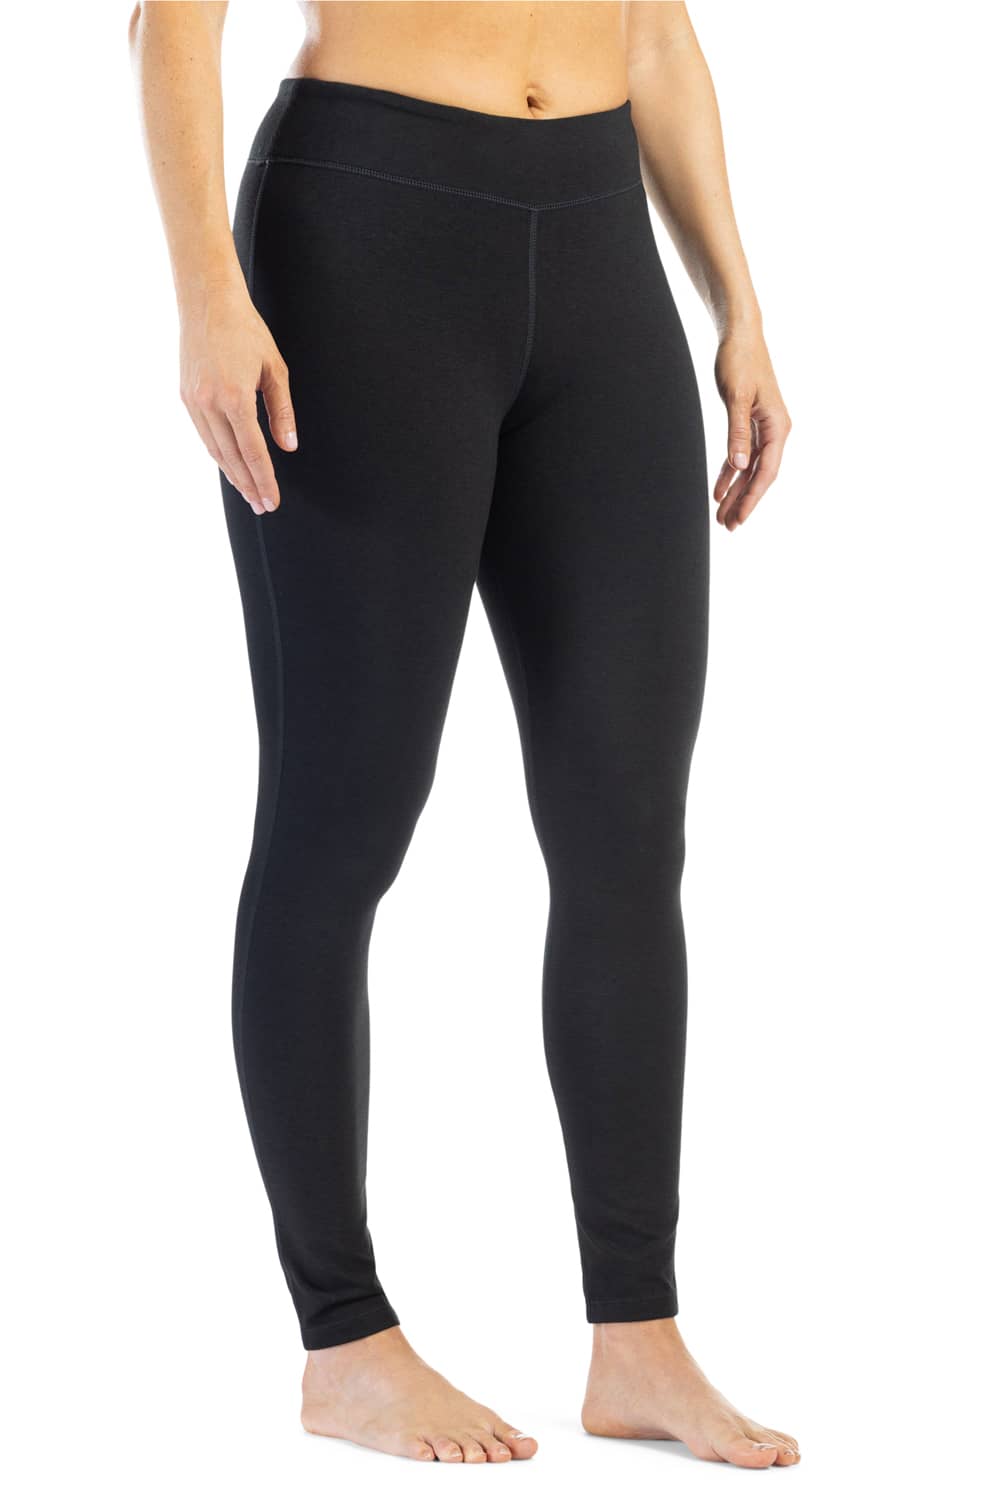 Women's EcoFabric™ Yoga Legging Tight with Back Pockets Womens>Activewear>Yoga Pants Fishers Finery Black X-Small Petite